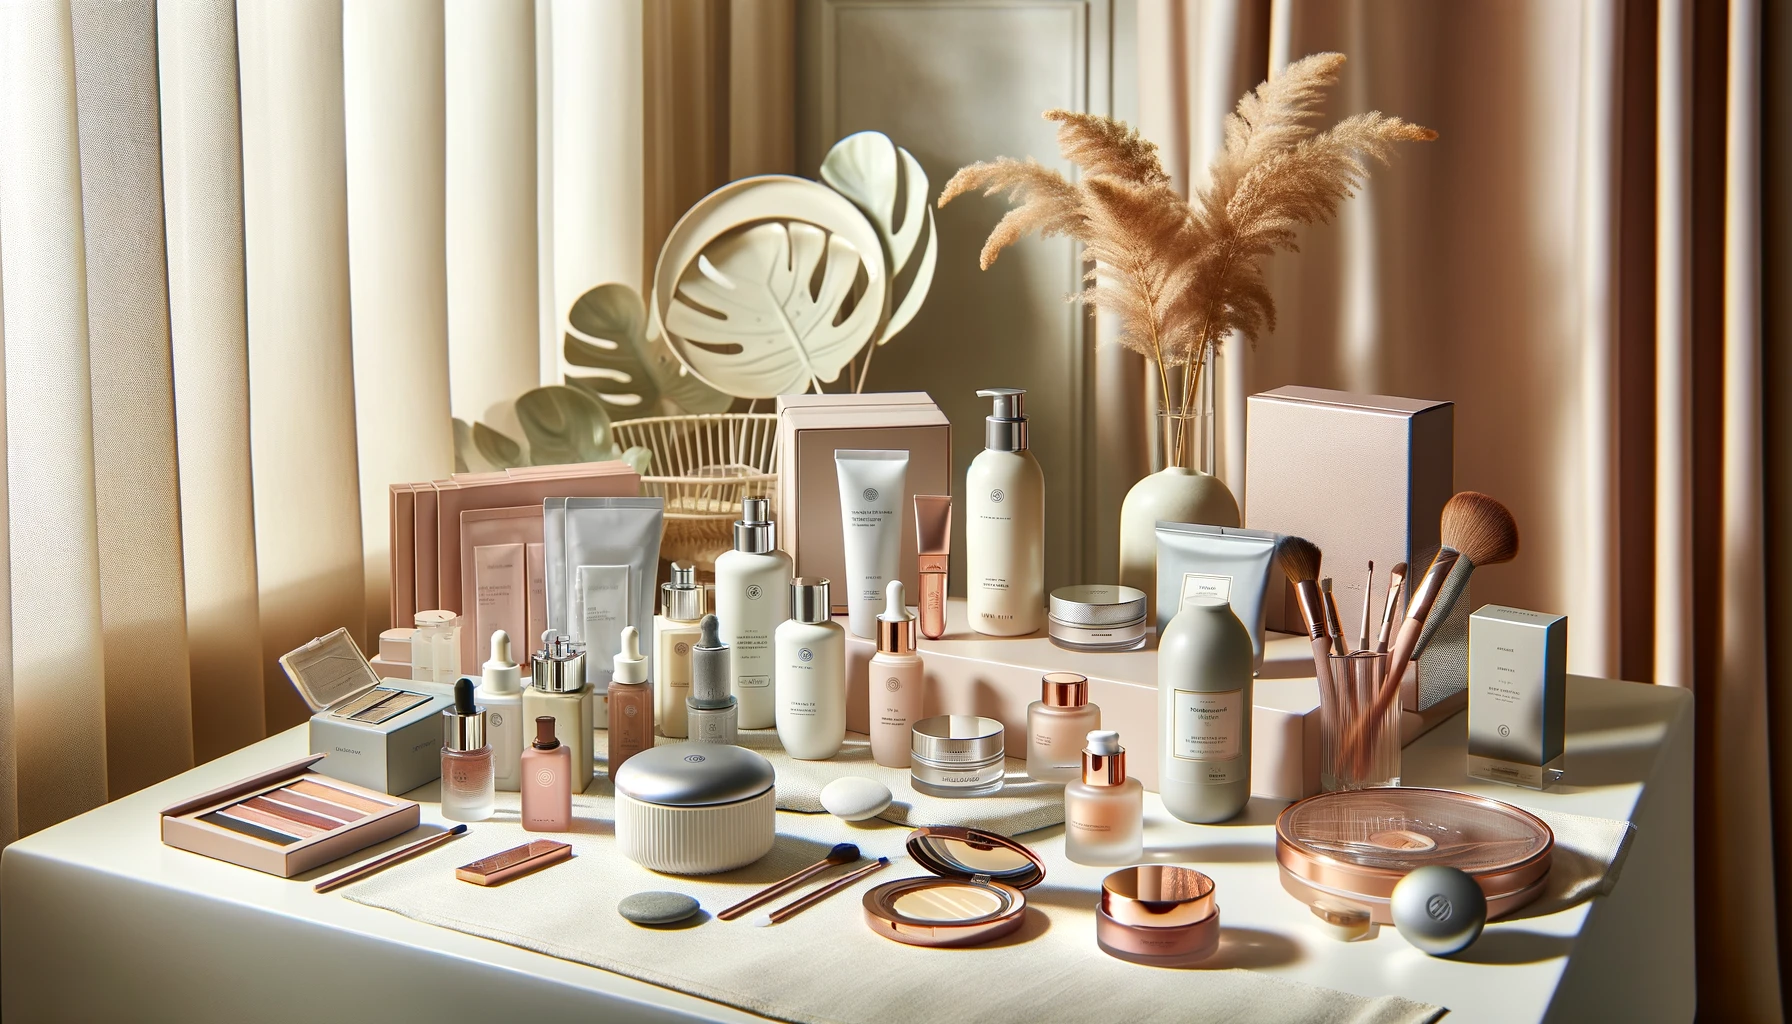 Assorted K-Beauty skincare and makeup products on a minimalist background, representing Korean beauty trends on Healthy Life - New Start blog.